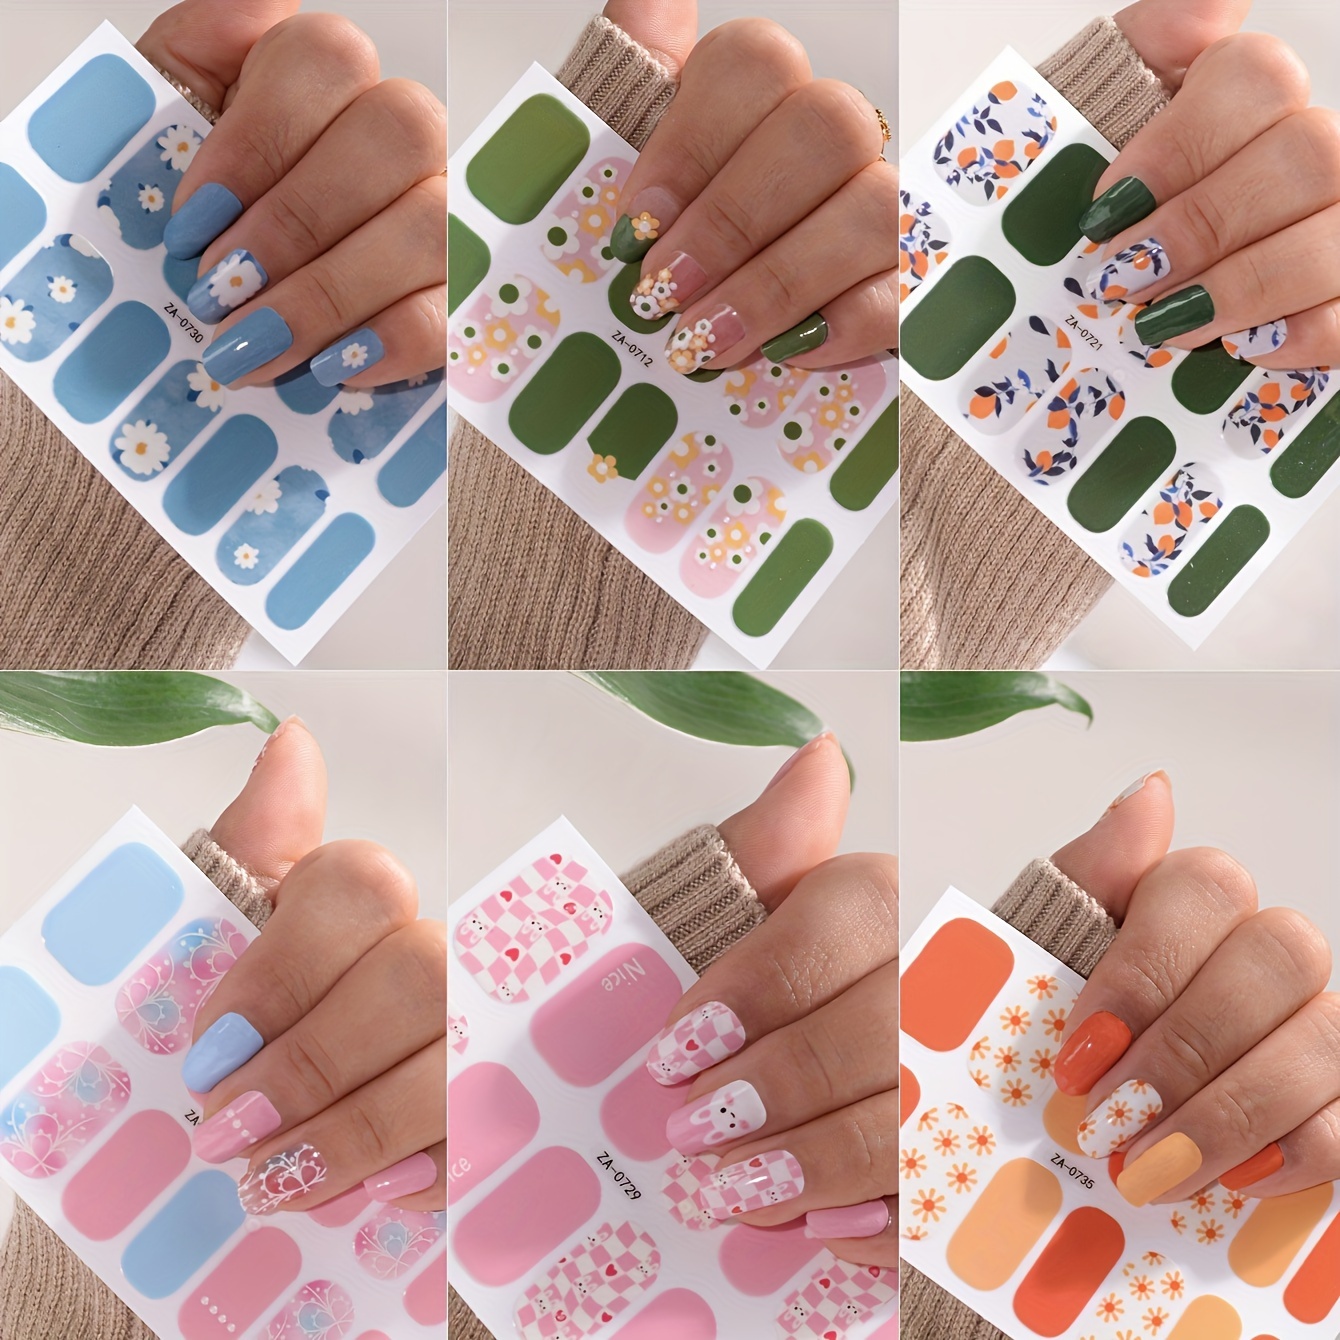 

6 Sheet Full Wrap Nail Polish Stickers With Daisy And Bunny Design, Easter Nail Strips Self-adhesive Gel Nail Strips,nail Art Decals For Home Women Girls Nail Decorations